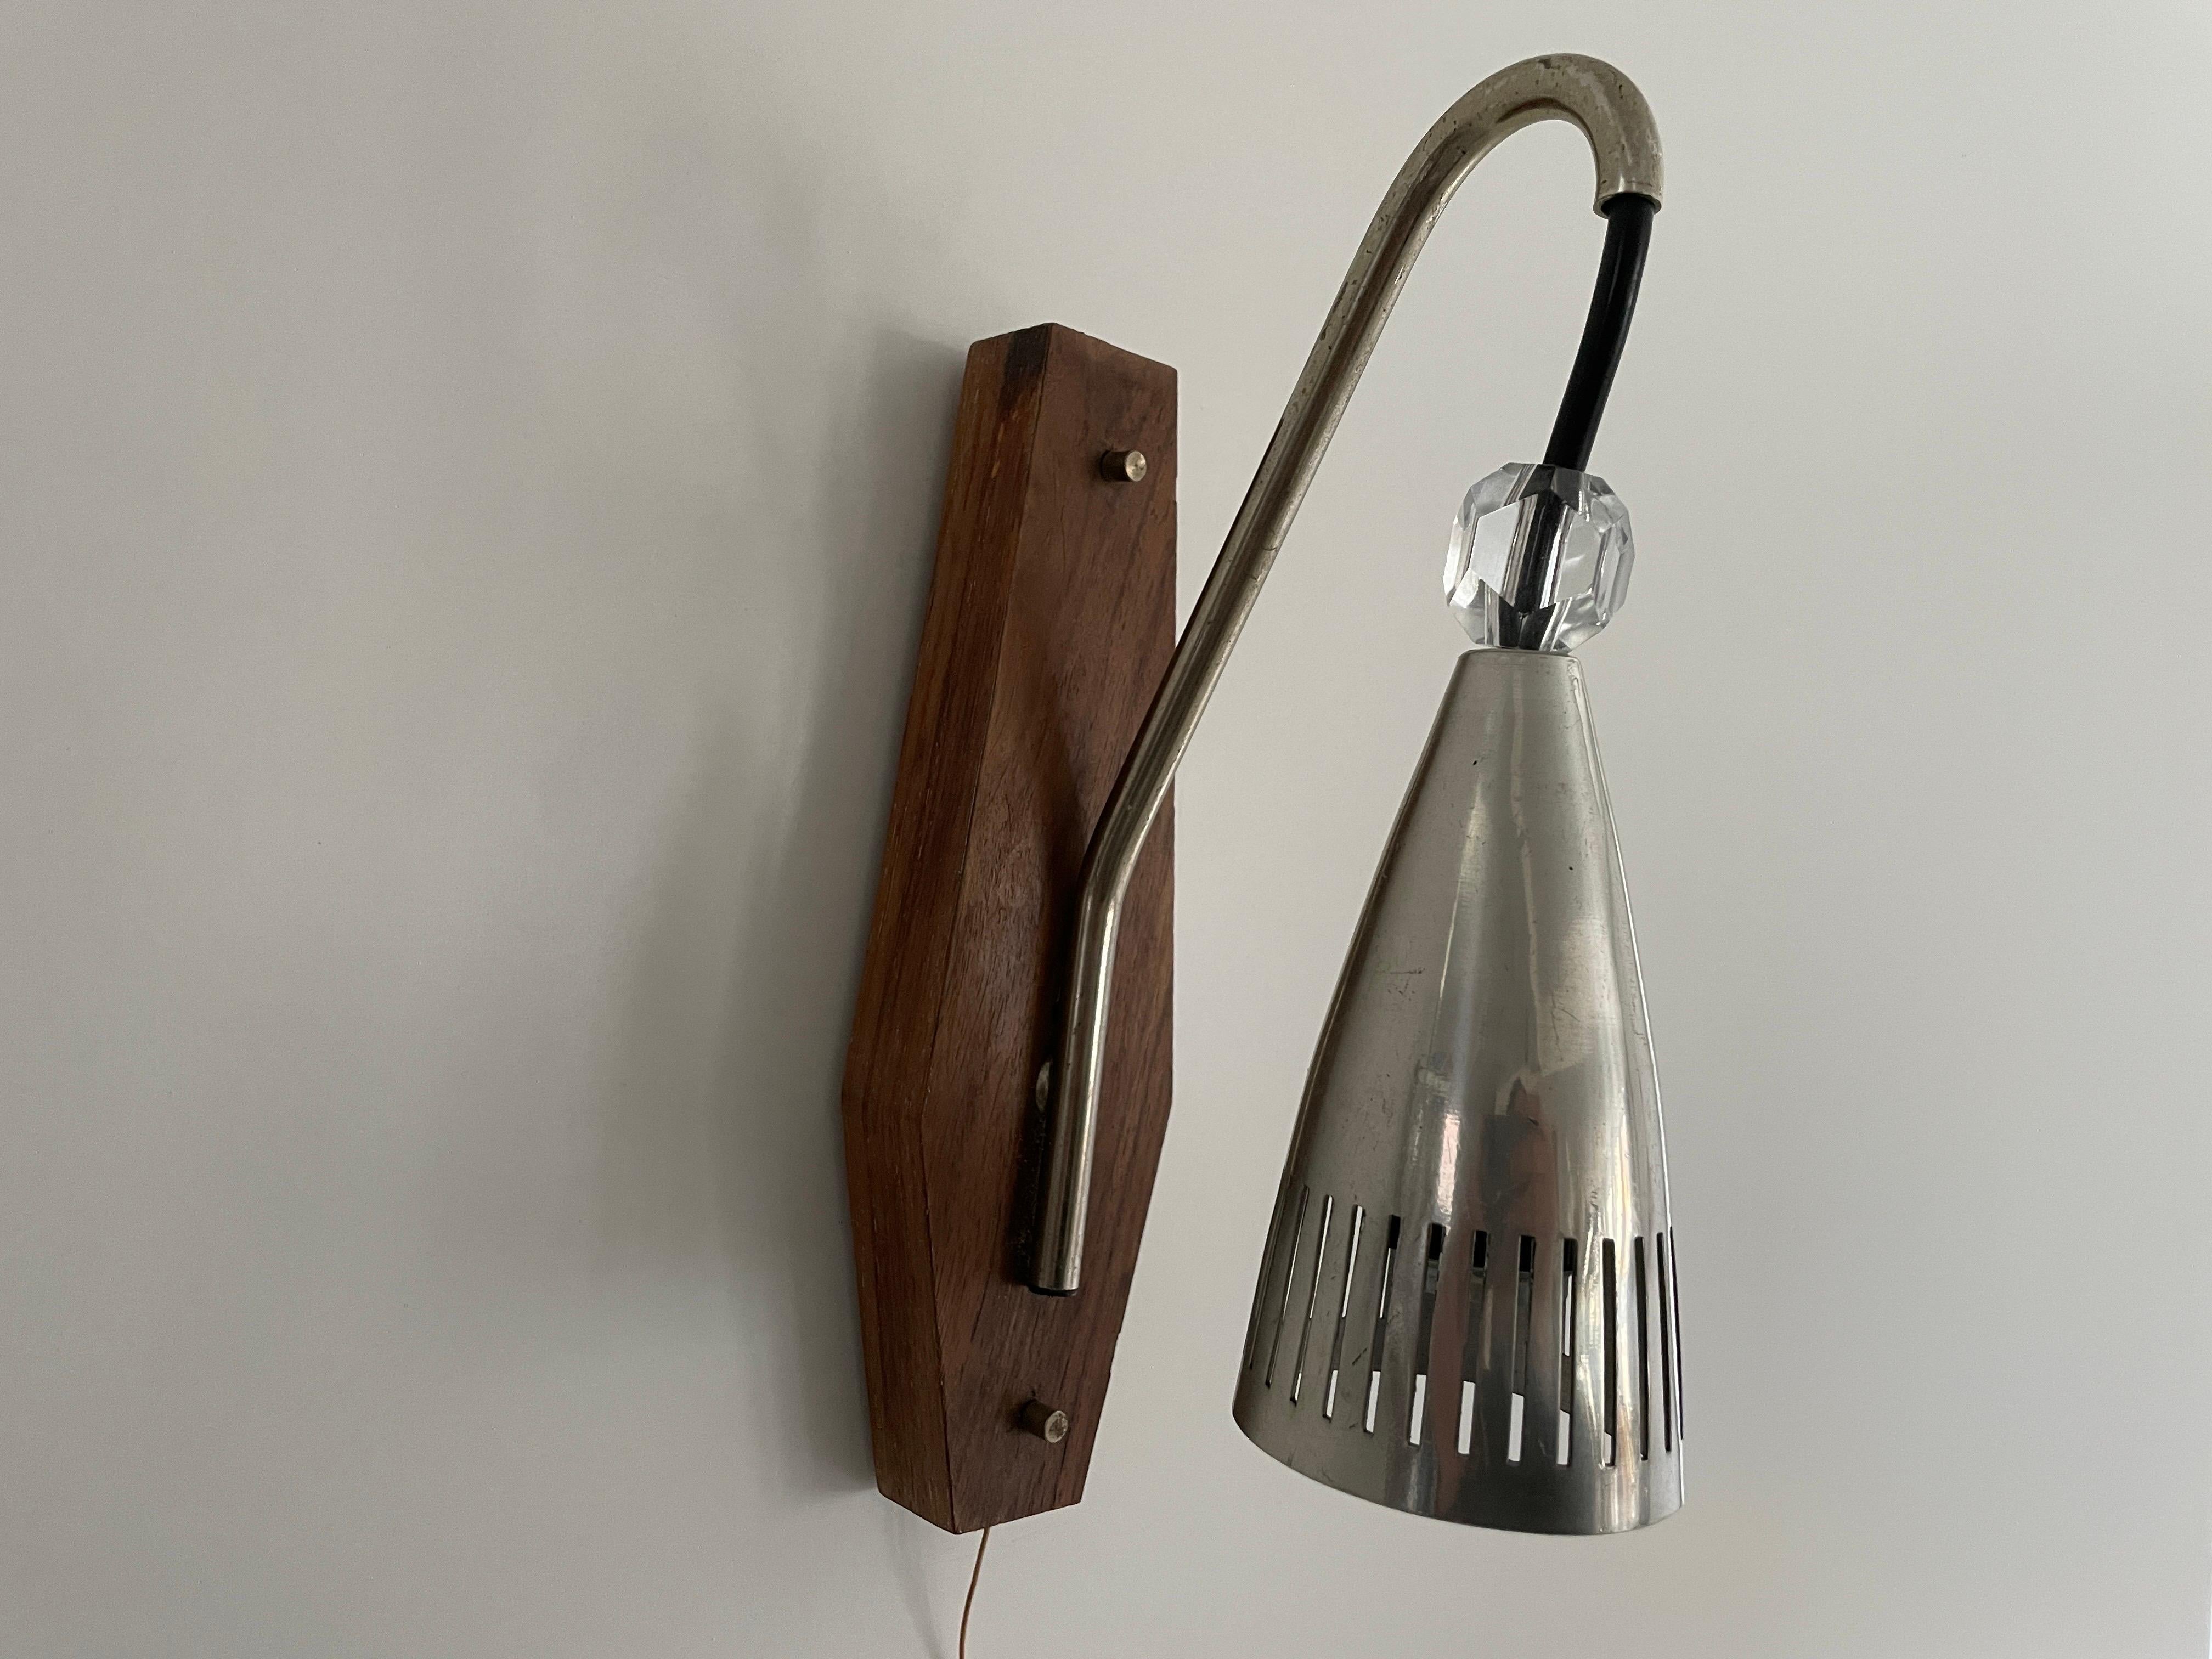 Grey Shade Danish Sconces with Wood Base, 1960s, Denmark For Sale 3